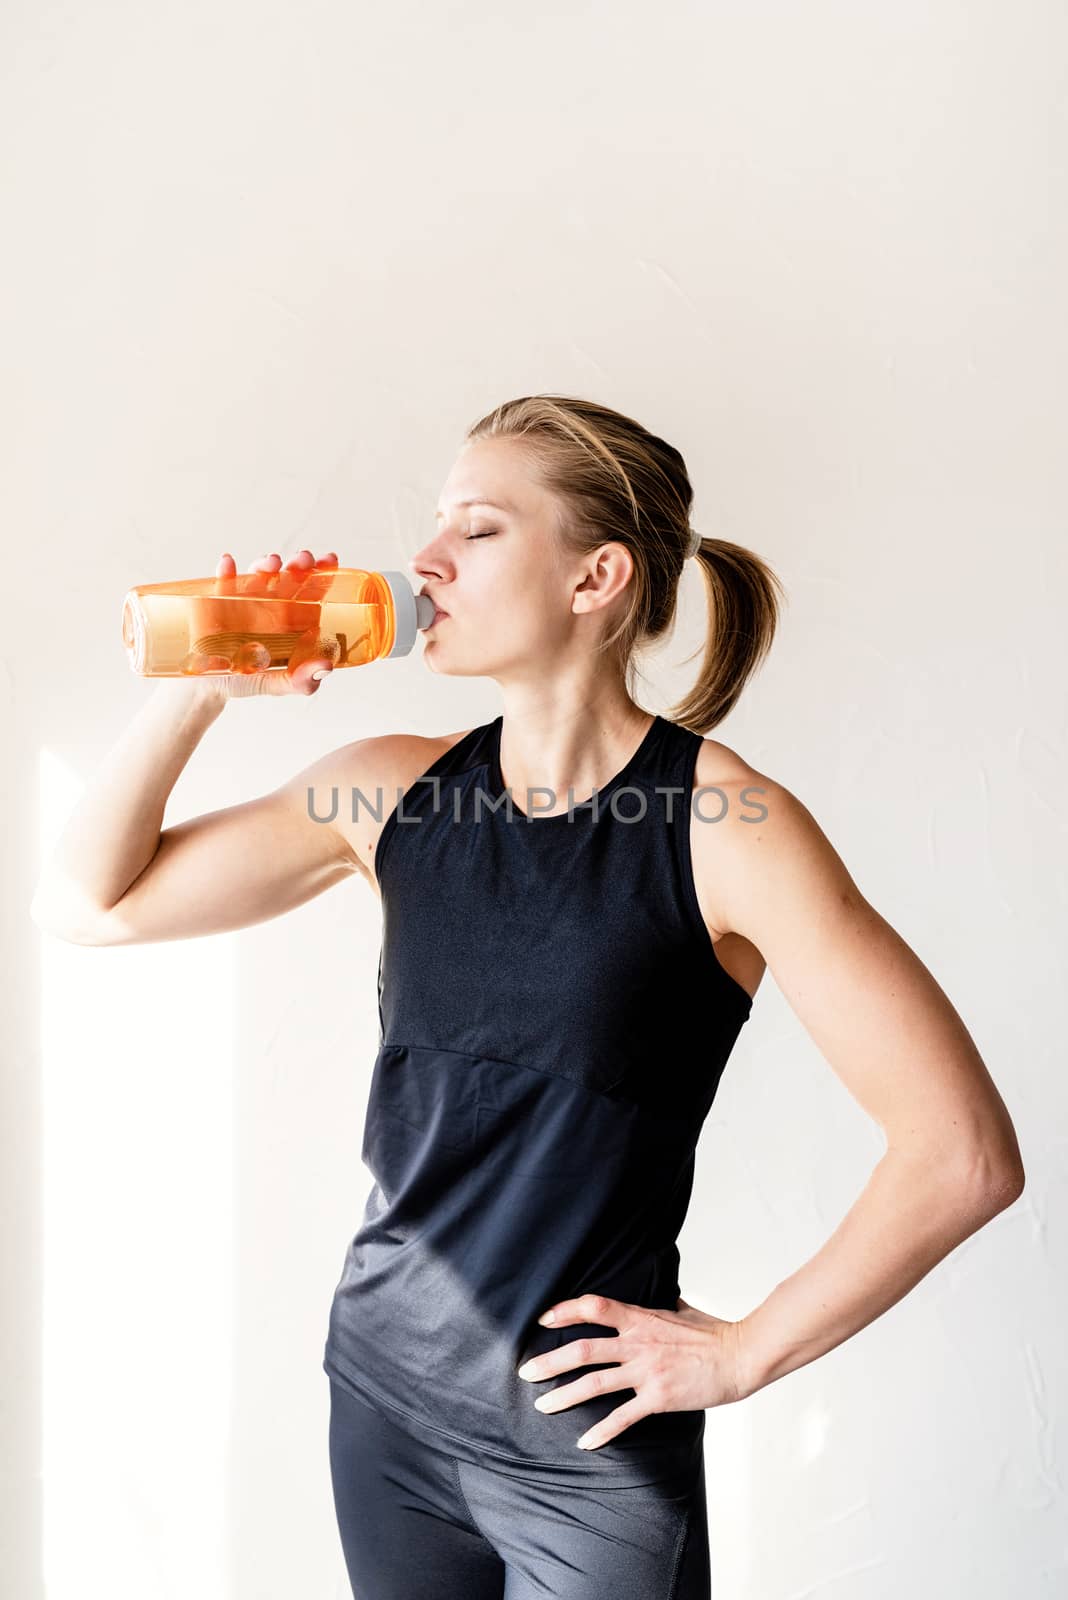 Healthy lifestyle. Sport and fitness. Young blond woman drinking water after workout